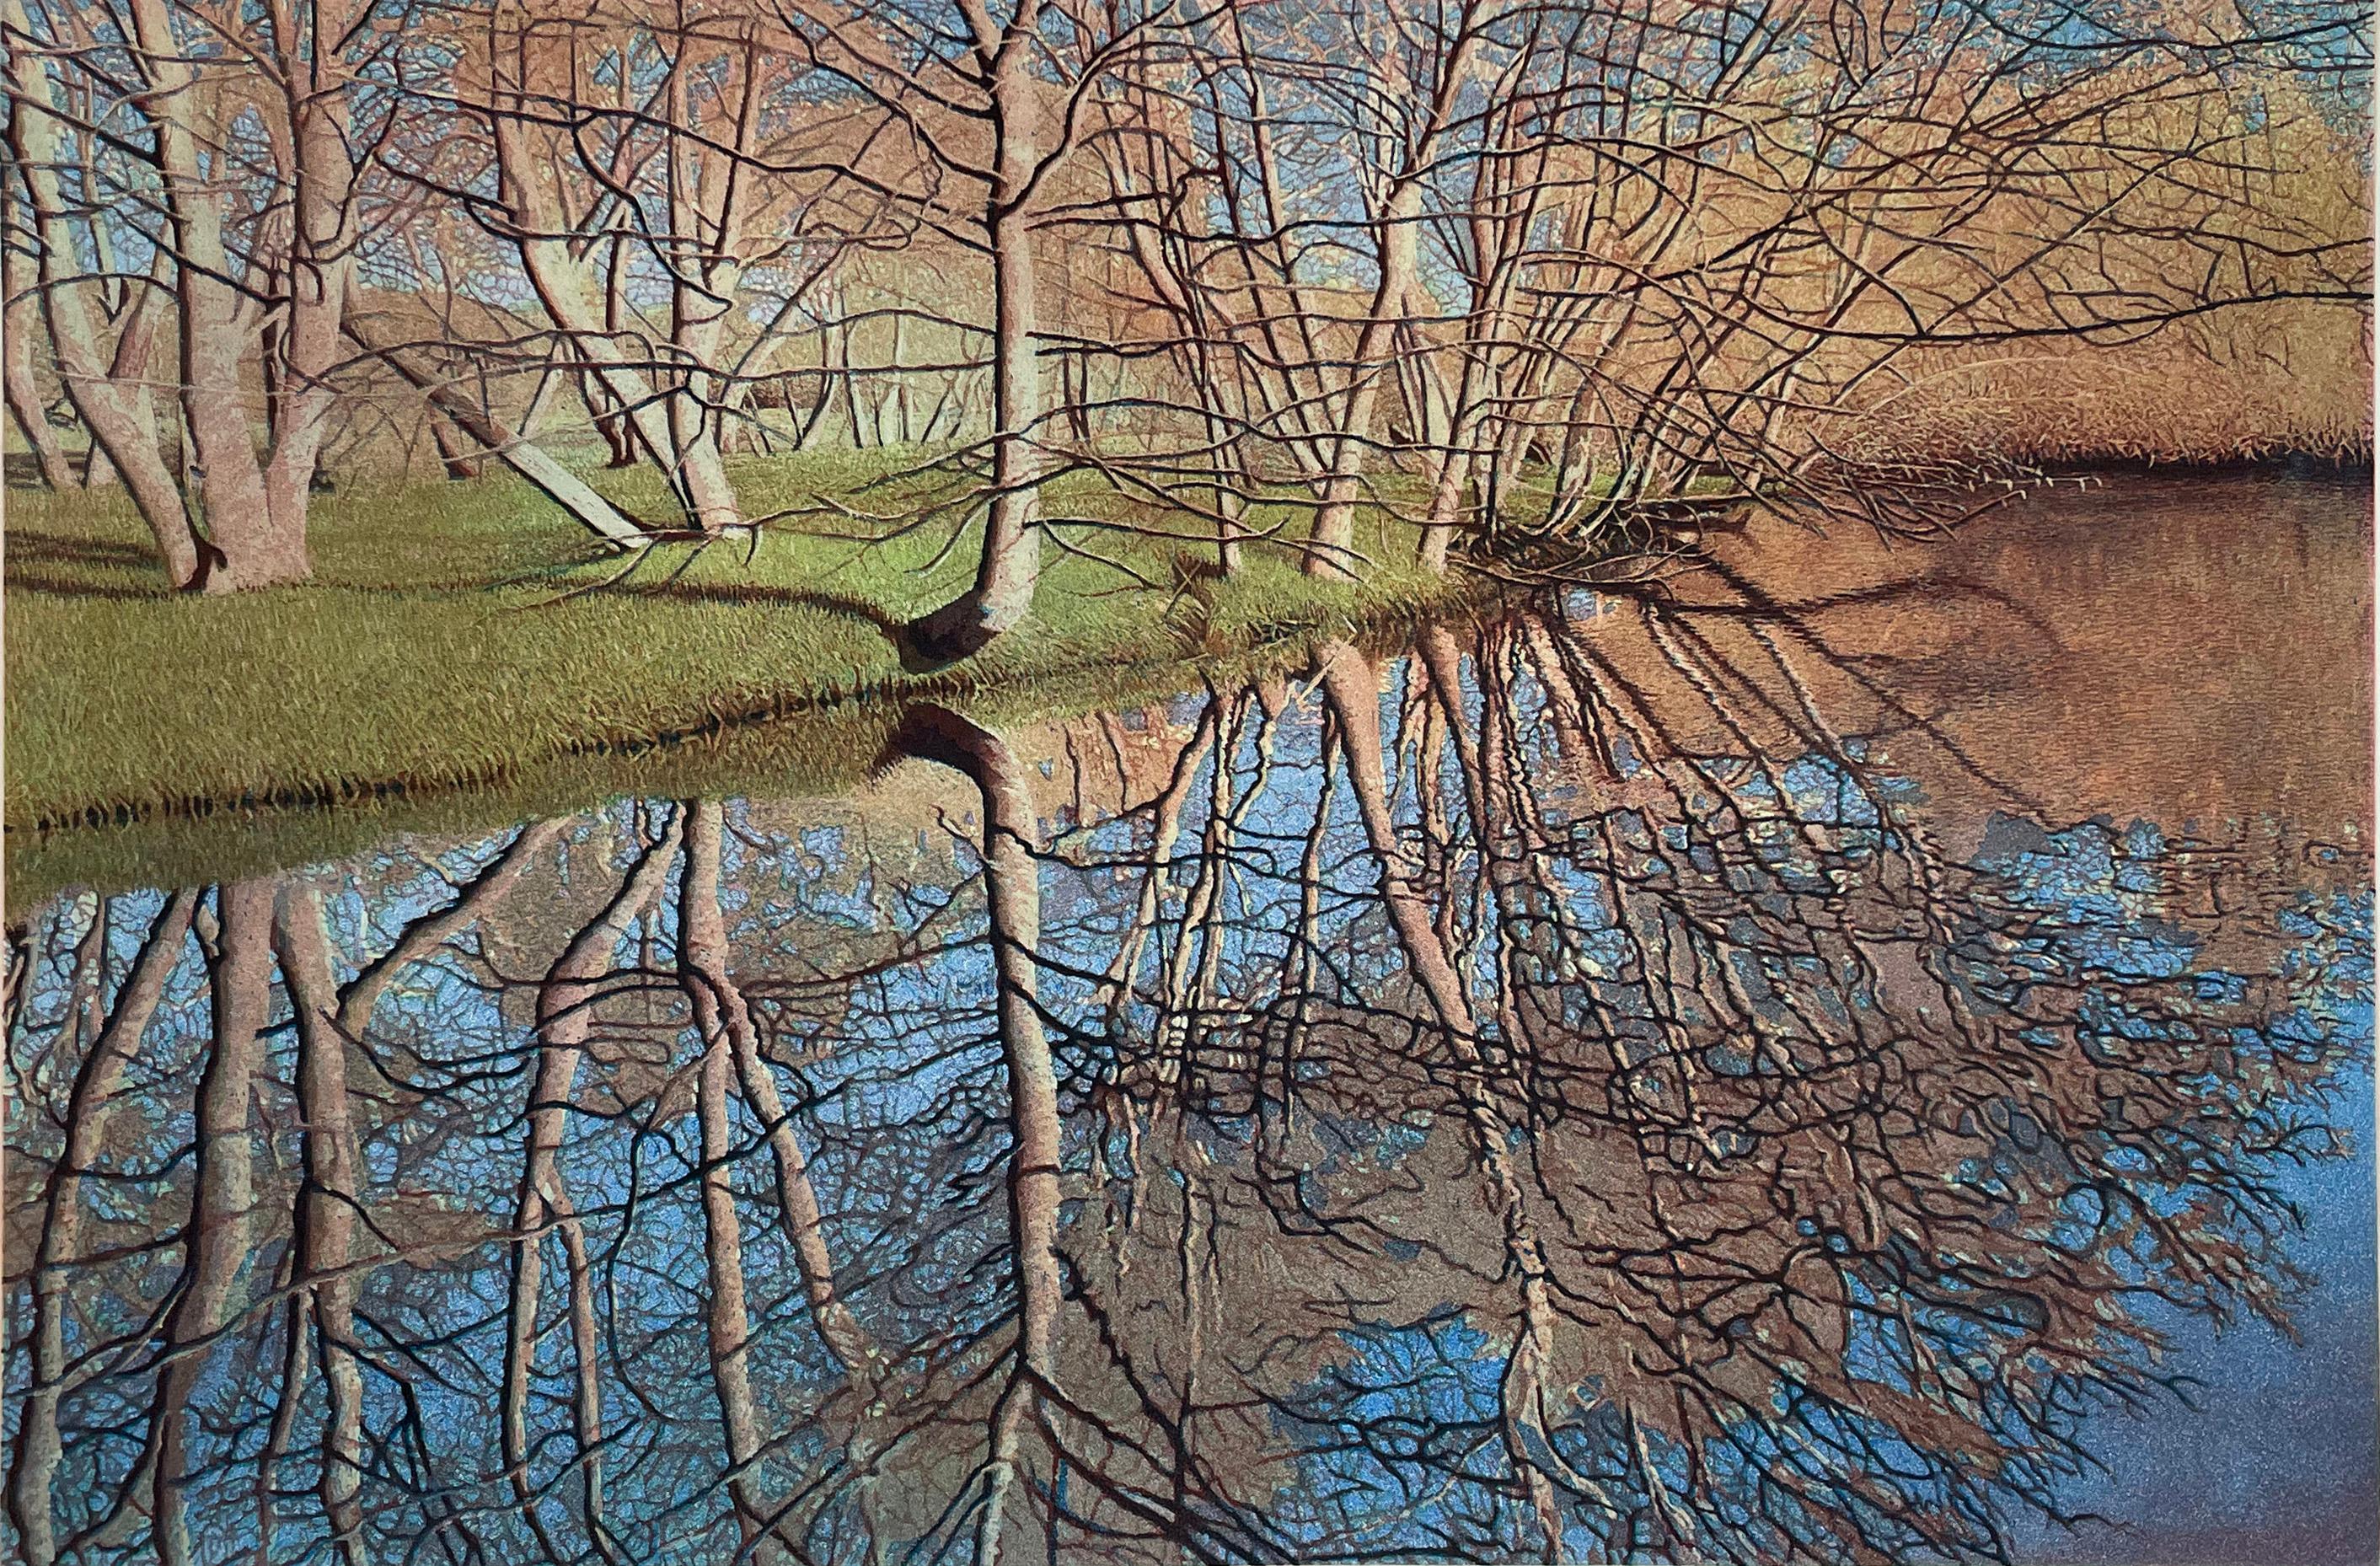 Signed, titled and numbered from the edition of 120.  Alder trees reflect in the waters of Bear Creek in Ashland, Oregon. The first green of spring graces the shore.

Born in Berkeley, California, on December 21, 1949, he was raised in a home that